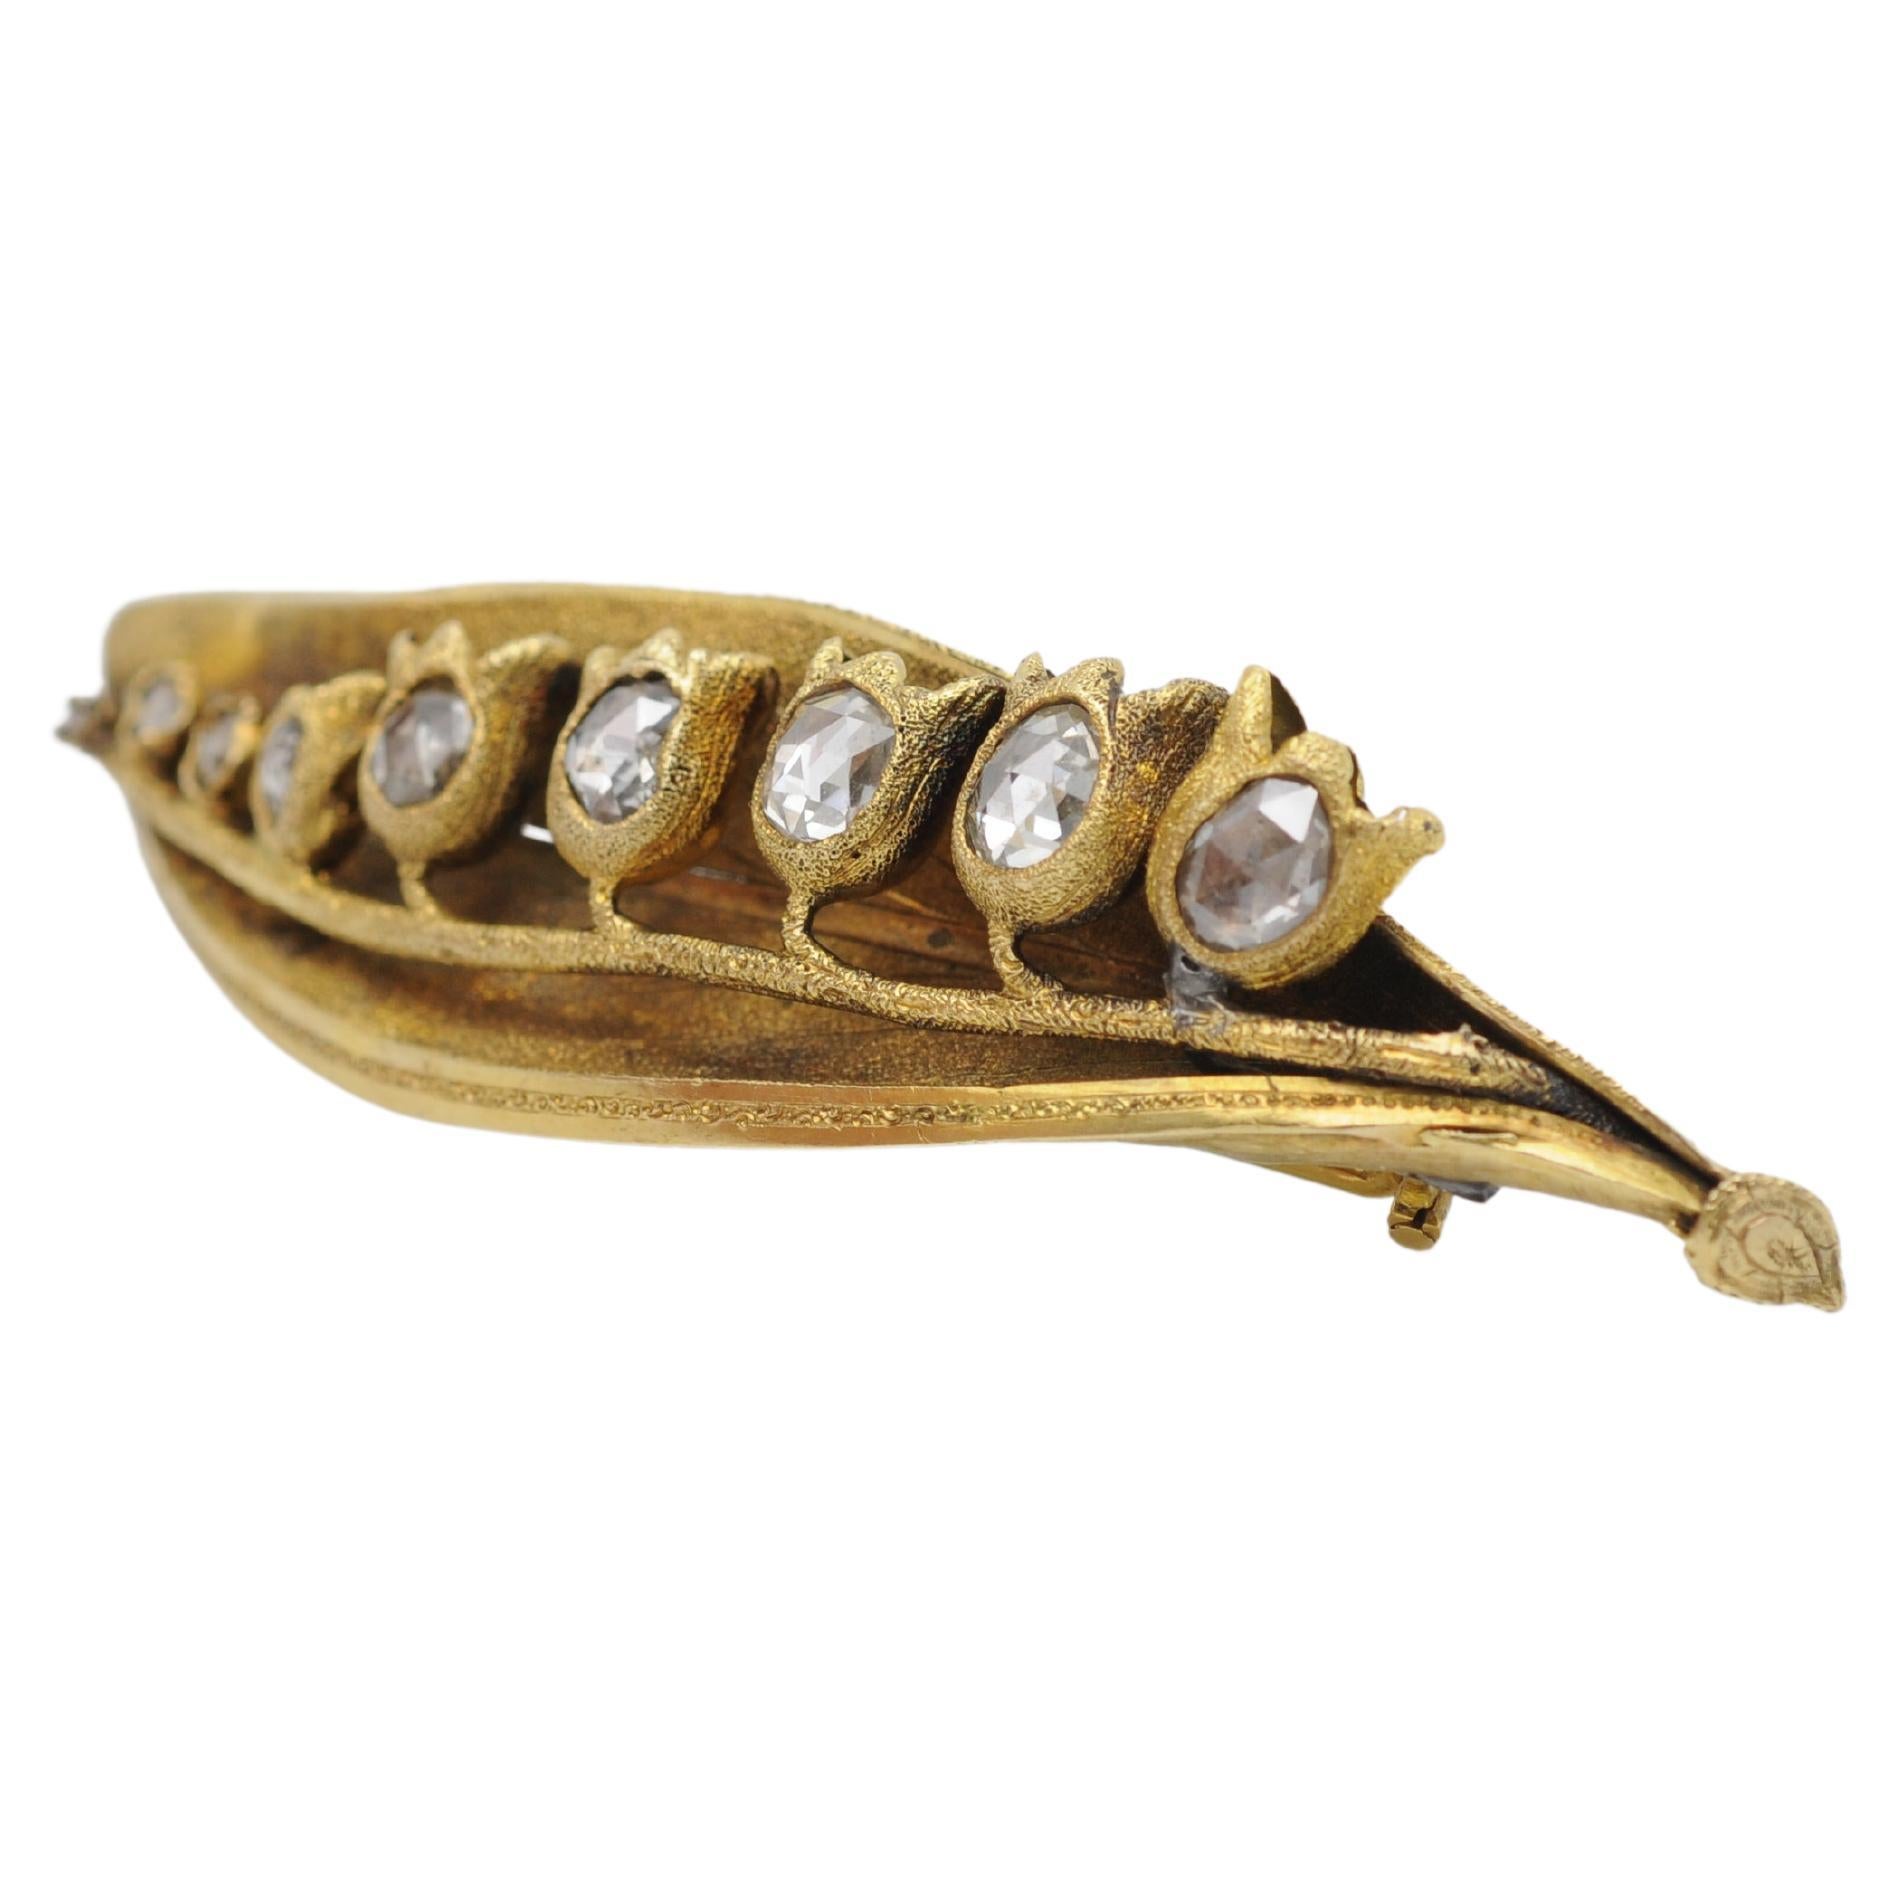  Art Nouveau Brooch  with diamonds in rose cut 14K Yellow Gold  For Sale 6